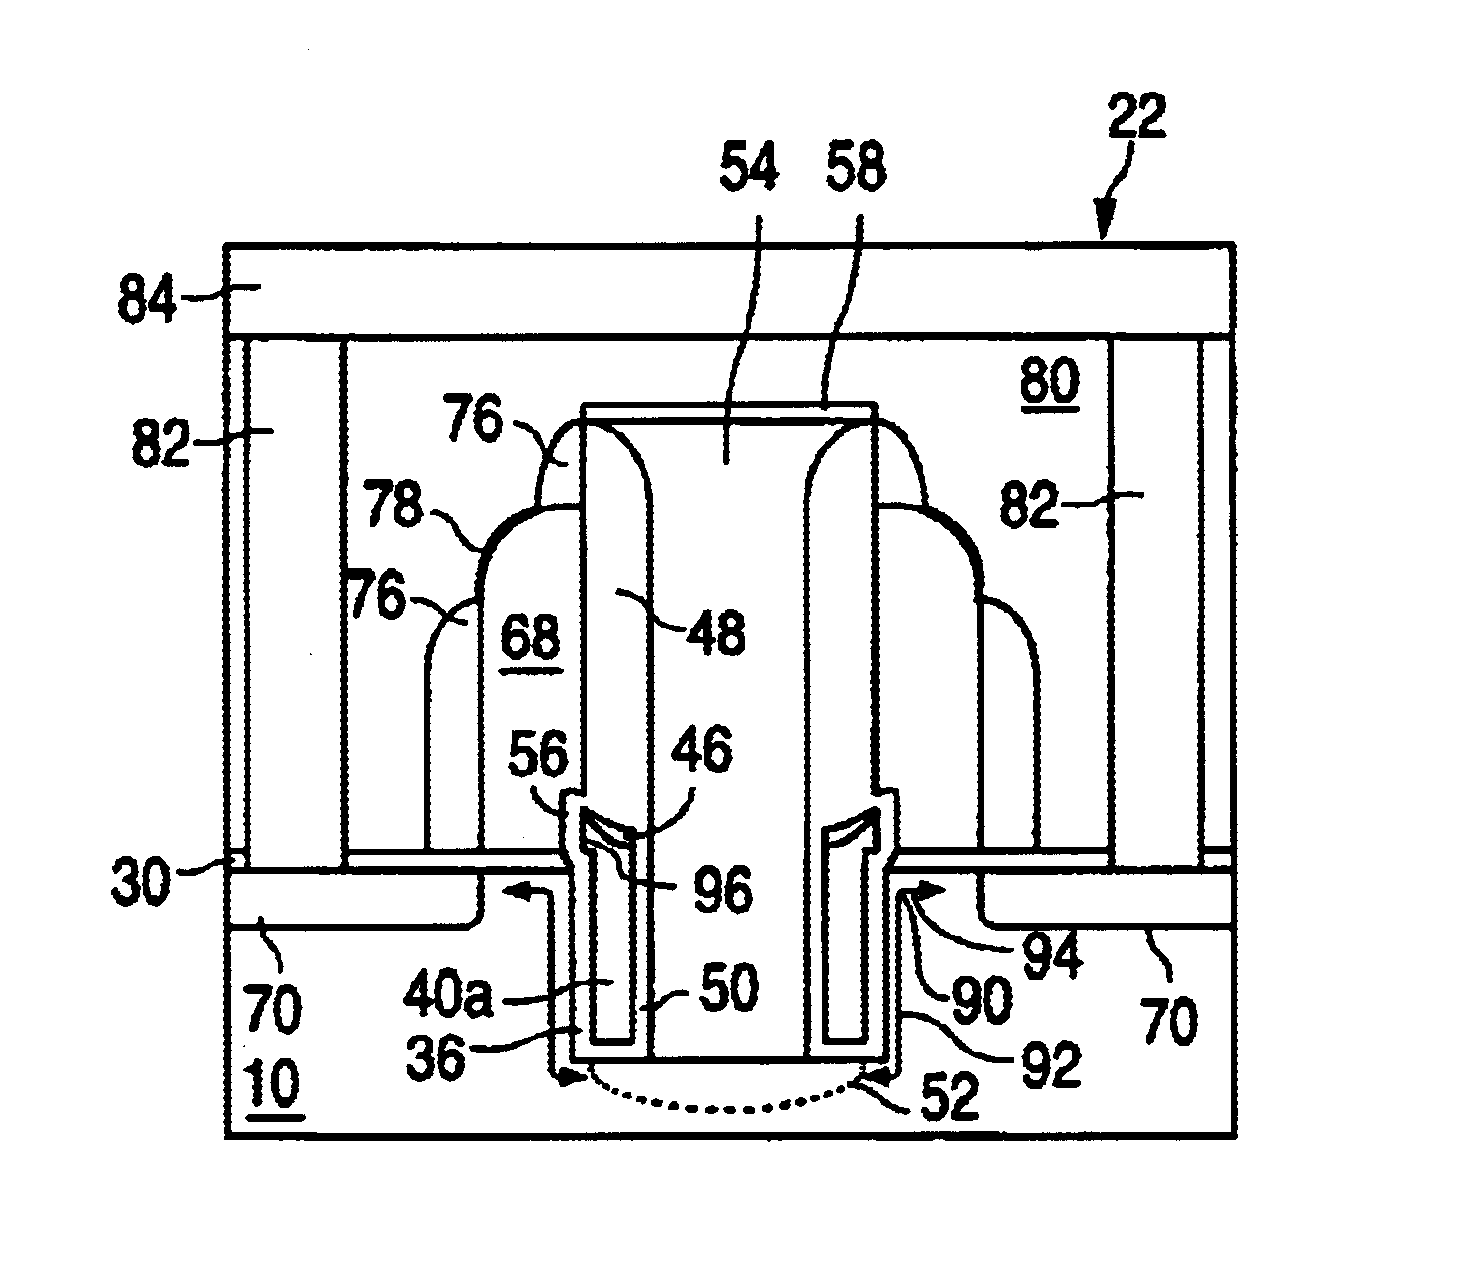 Semiconductor memory array of floating gate memory cells with buried source line and floating gate